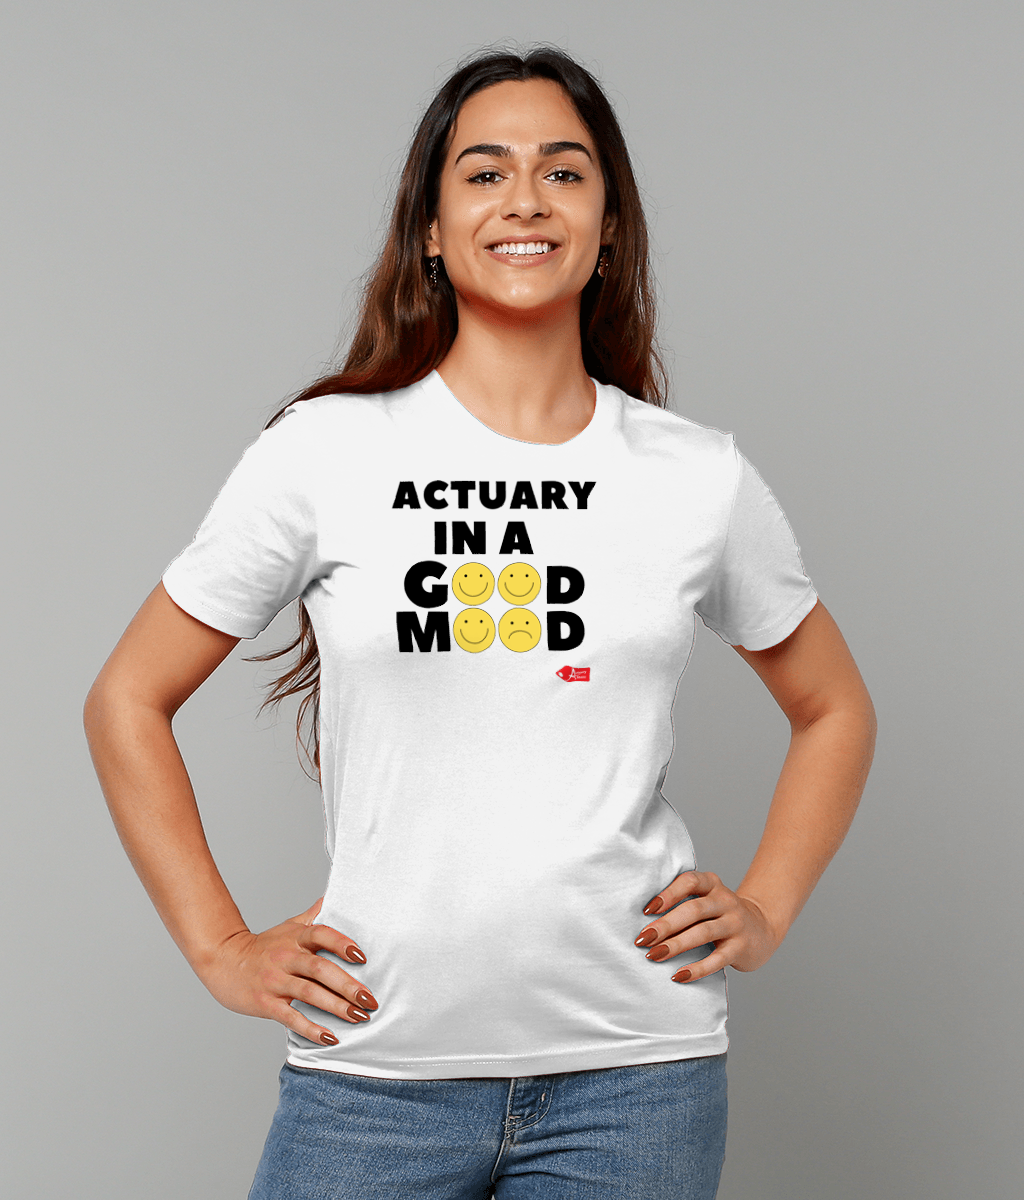 Actuary In a Good Mood Emoji White T-Shirt